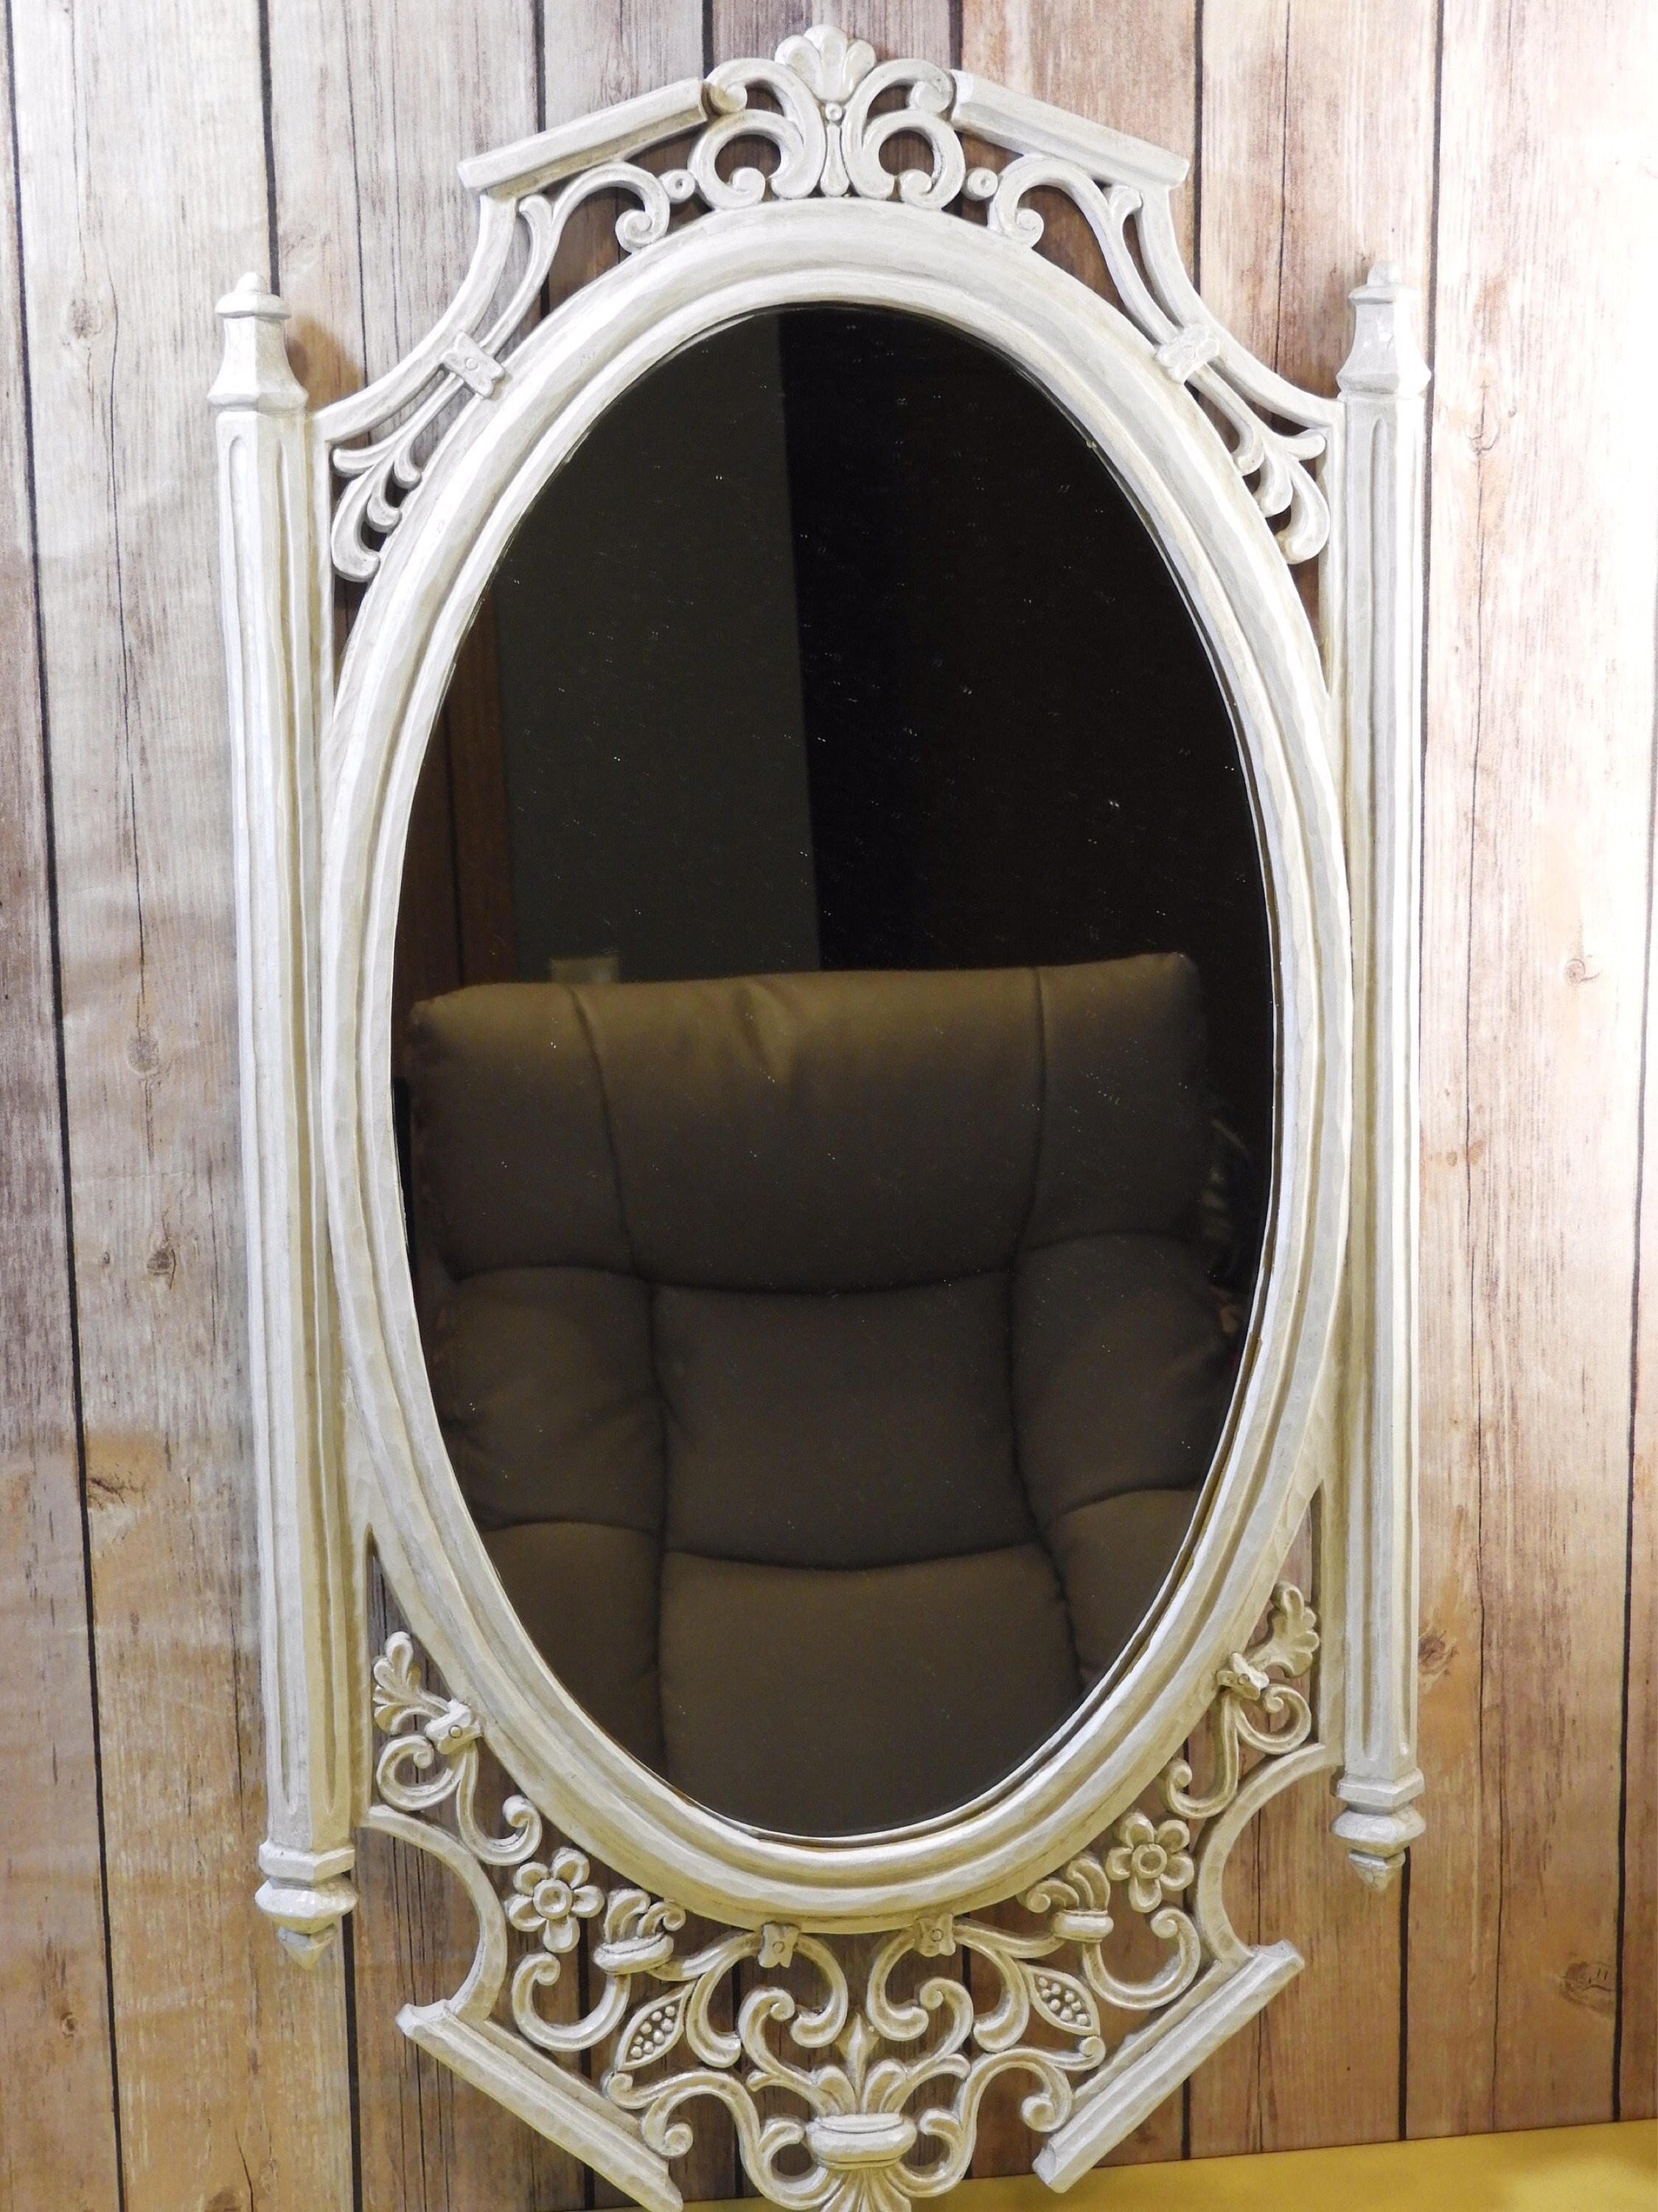 Vintage Antiqued White Wall Mirror, Decorative Syroco Wall Hanging ...
